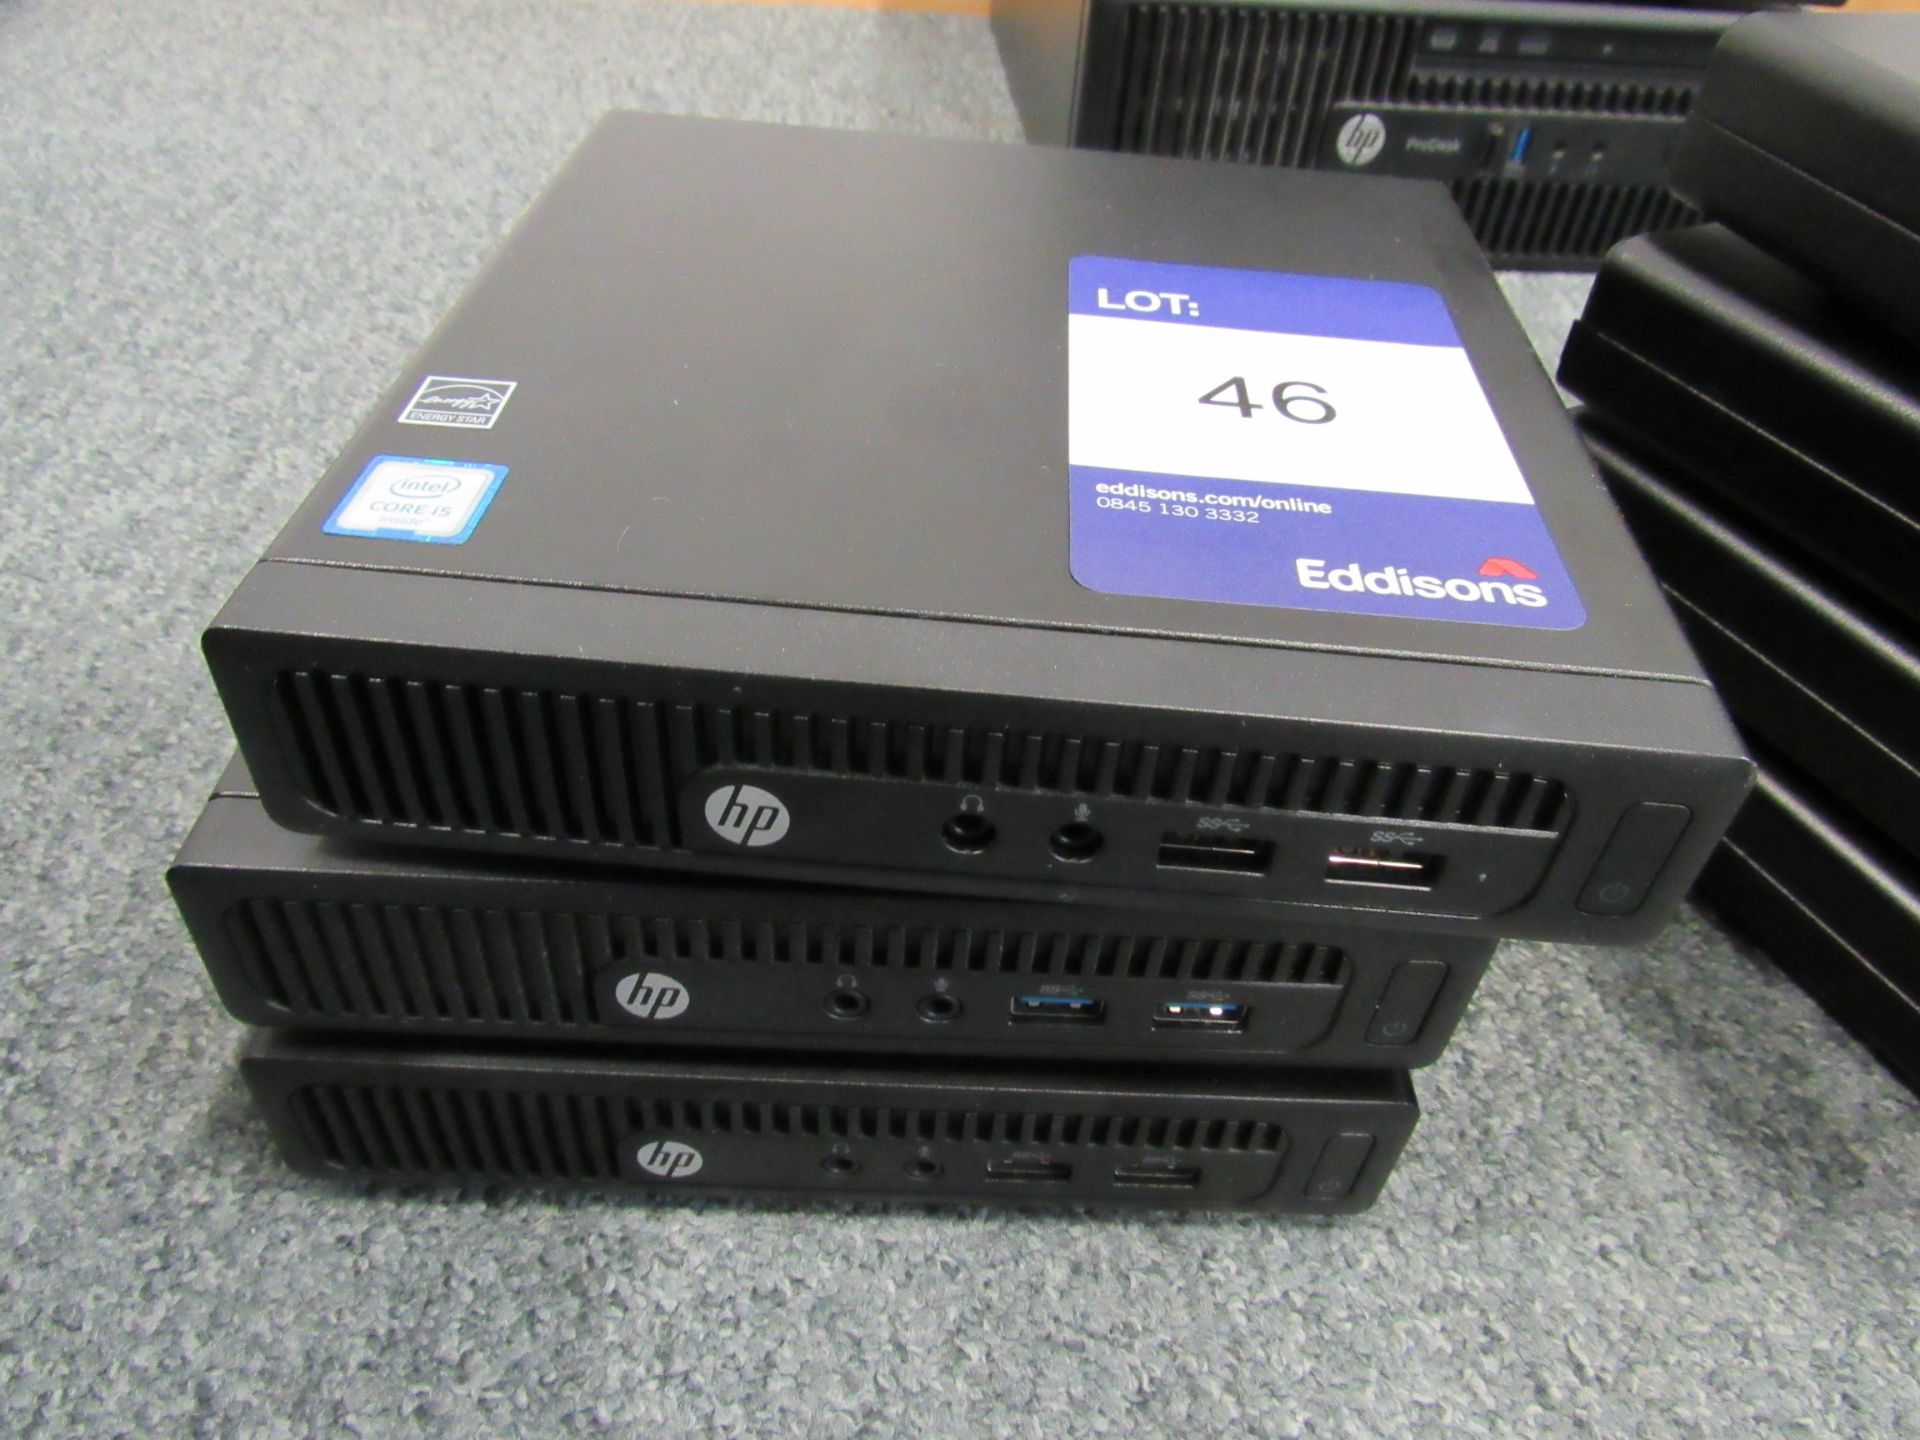 3 HP 260 G2 DM Business PC’s, No HDD’s